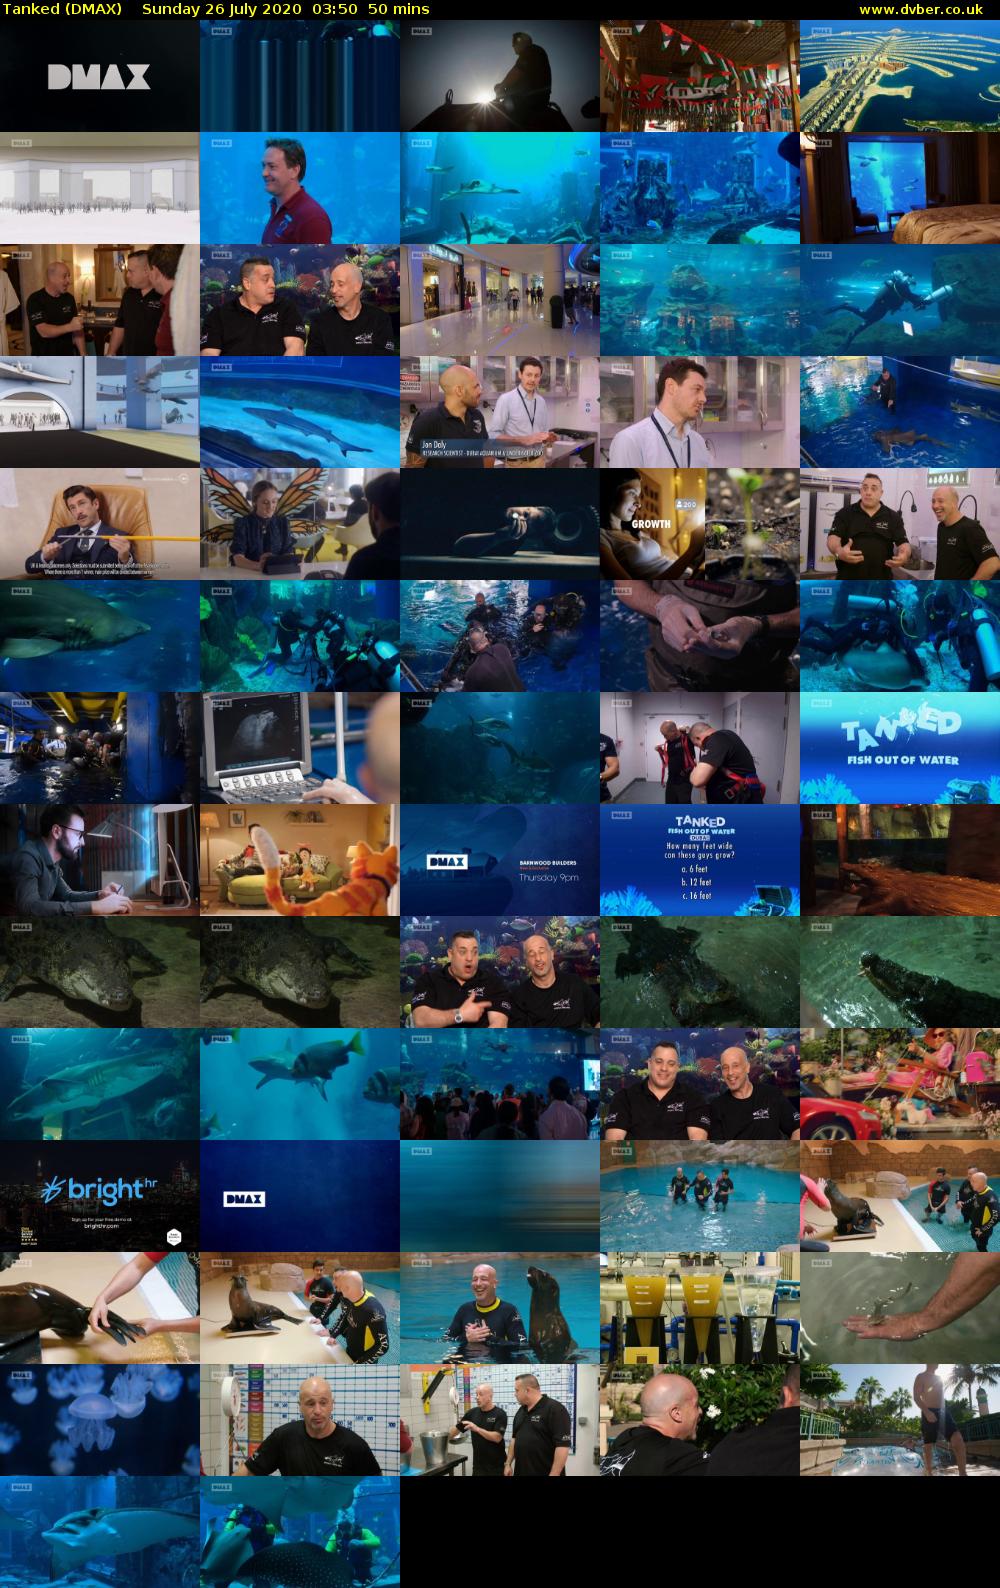 Tanked (DMAX) Sunday 26 July 2020 03:50 - 04:40